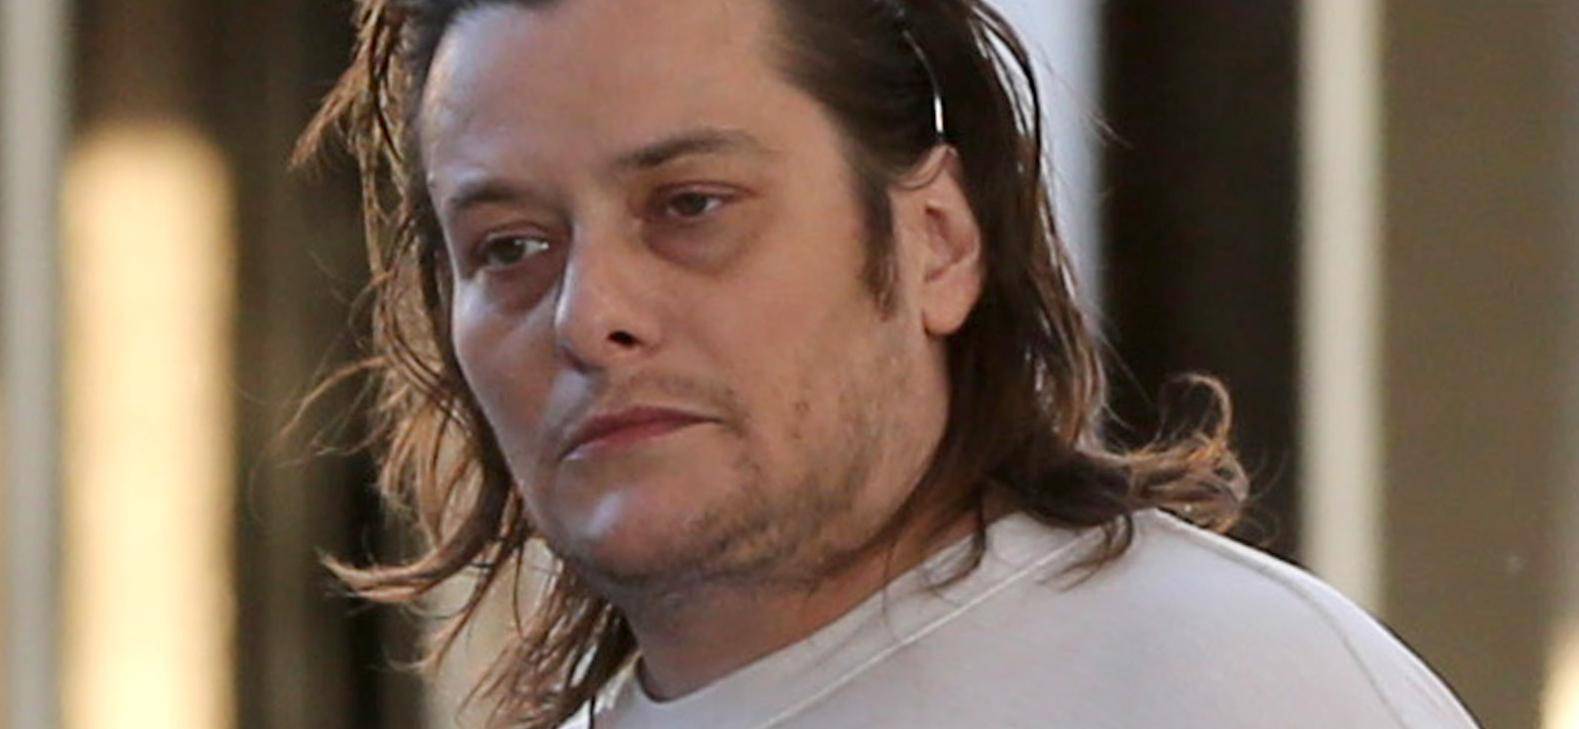 *EXCLUSIVE* Edward Furlong looks worse for wear during a shopping mall trip